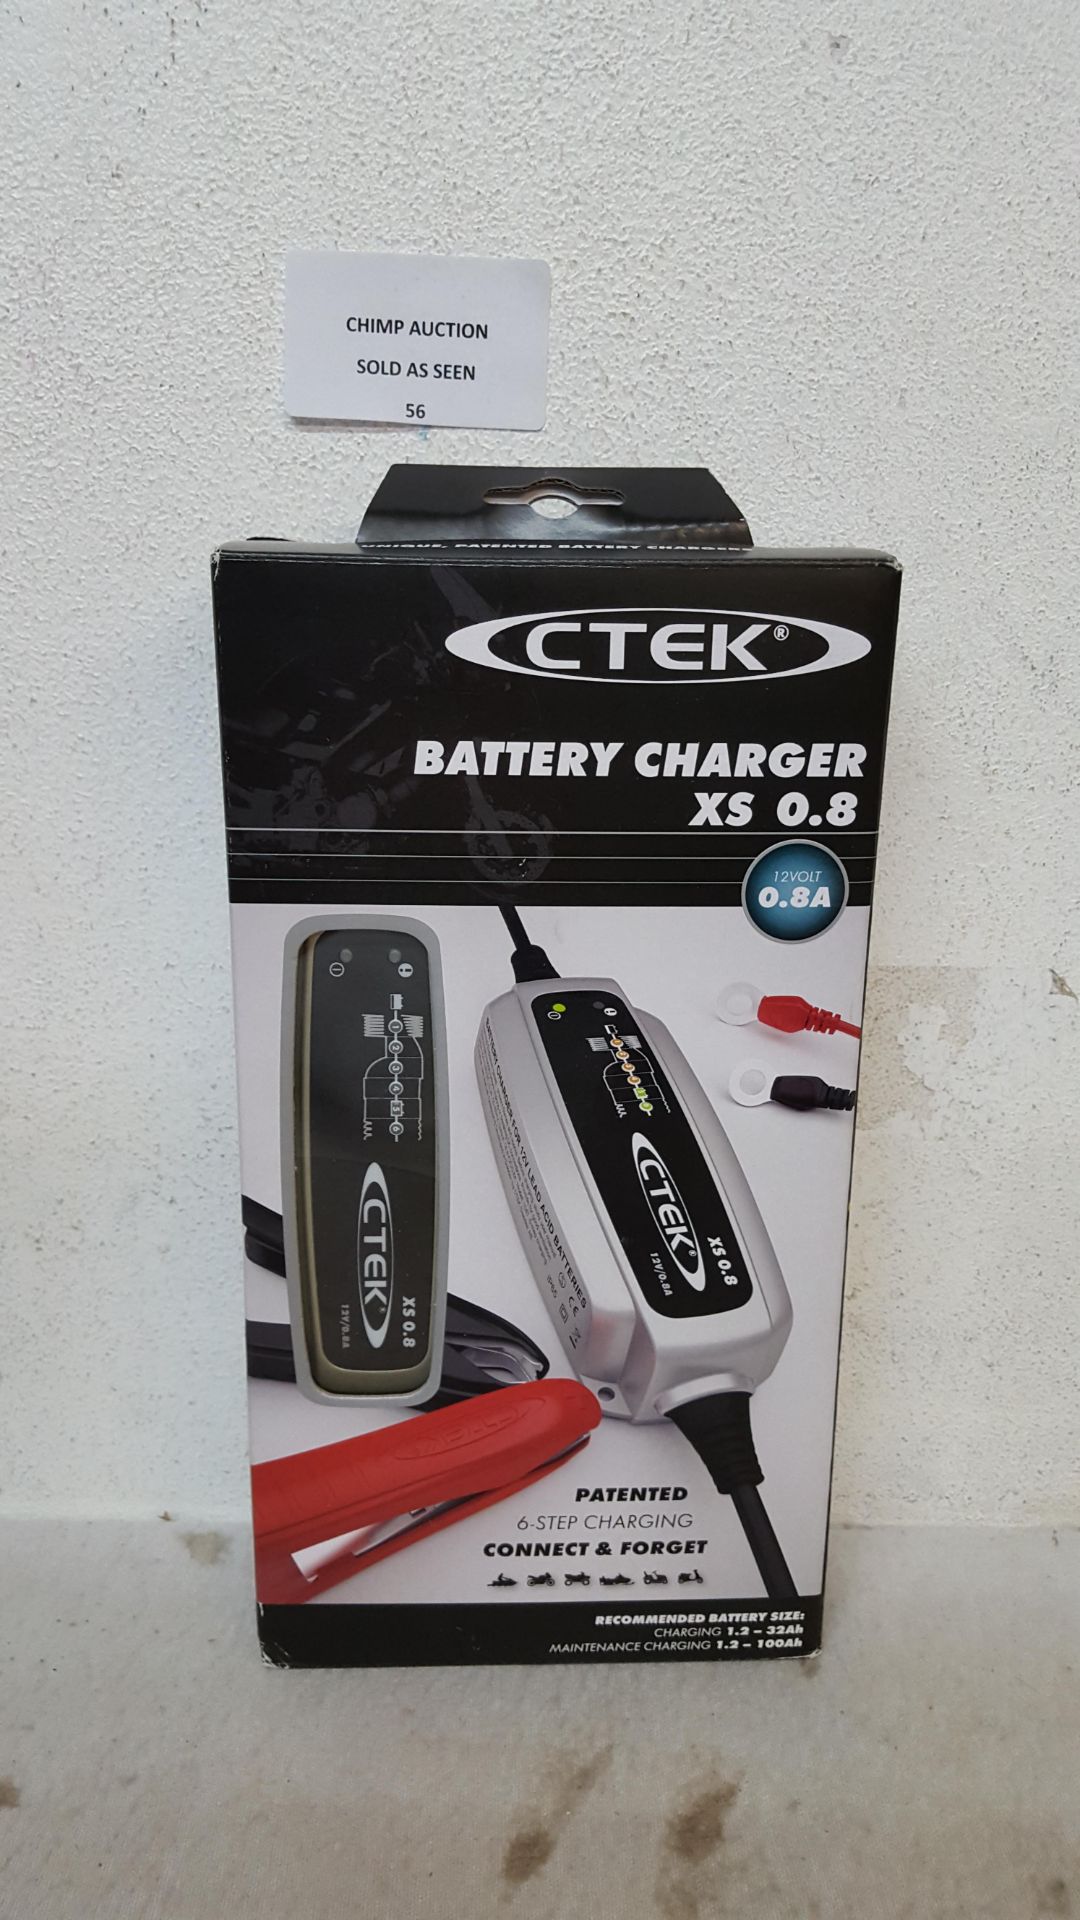 CTEK XS 0.8 12V 1.2A - 32A 6-Stage Battery Charger RRP £39.99